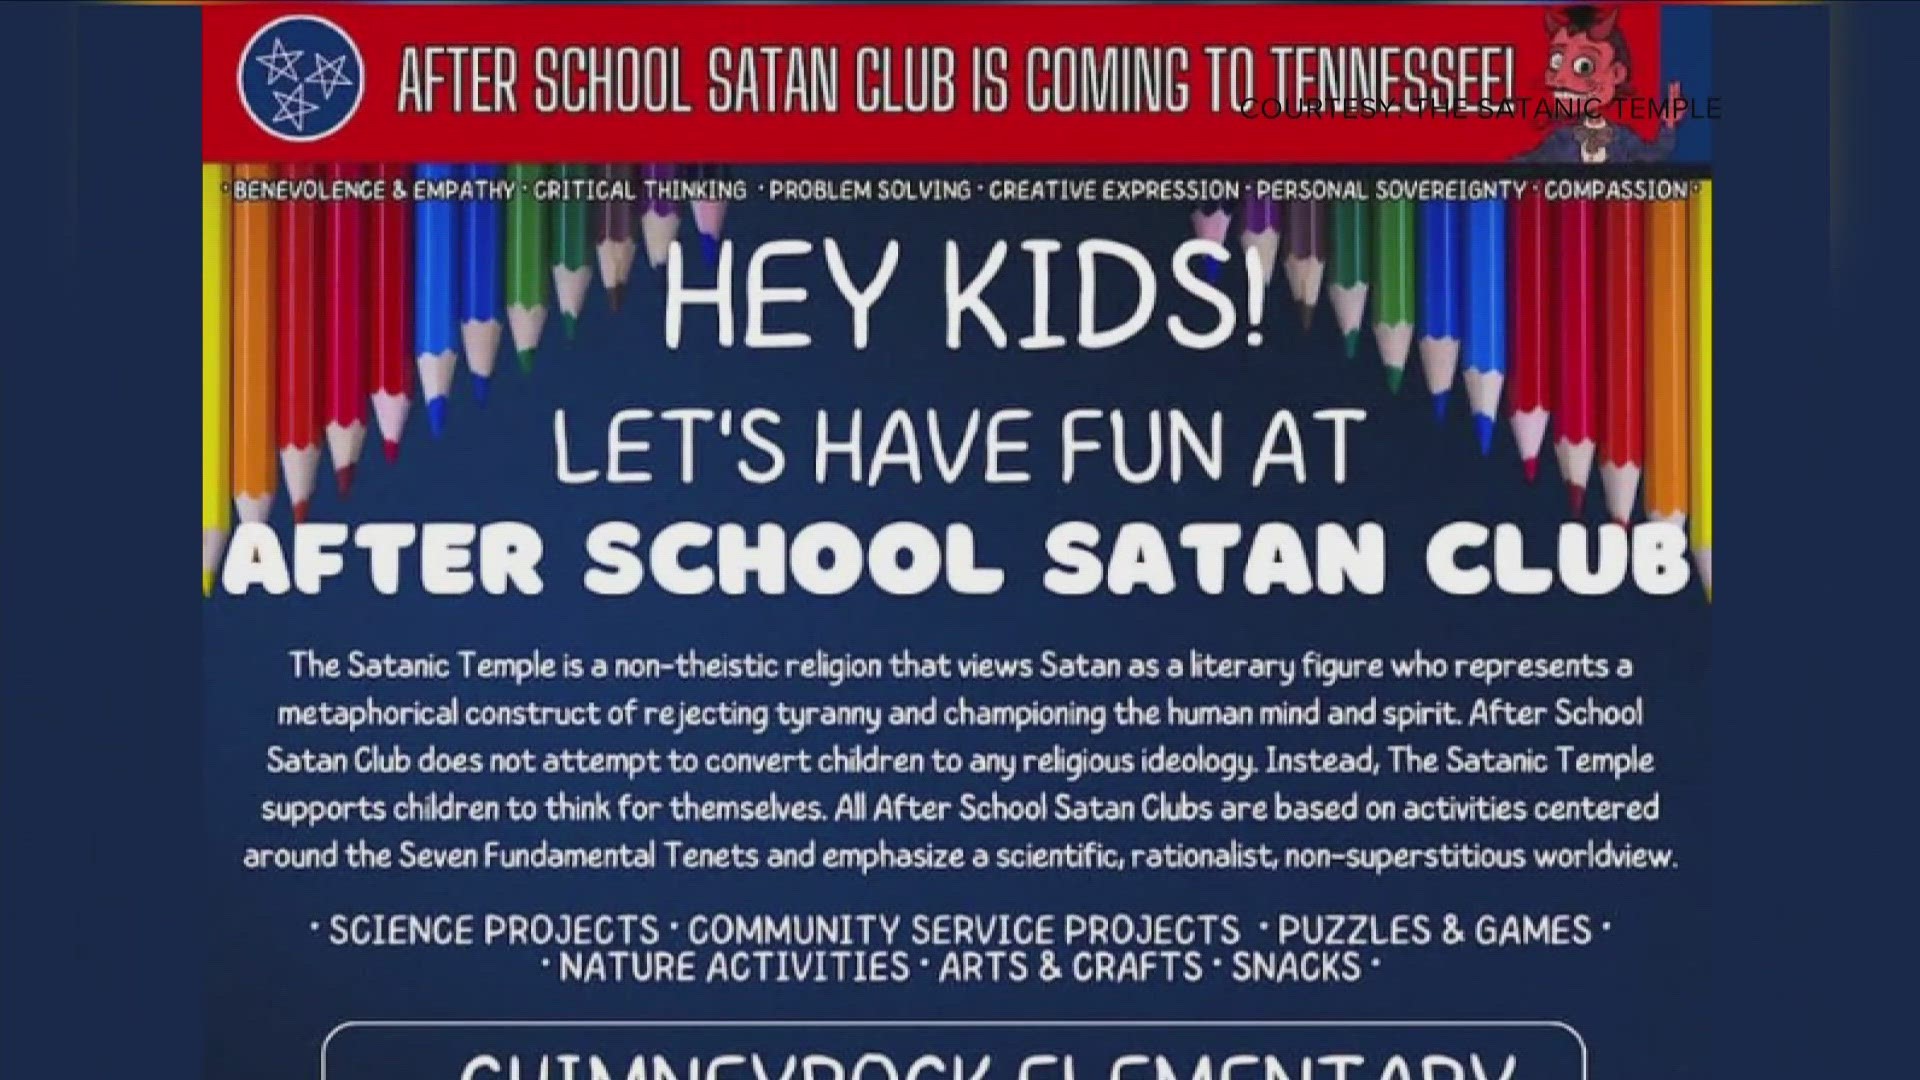 Chimneyrock Elementary released a statement about the Satan club to Memphis parents, saying they are committed to upholding the principles of the First Amendment.